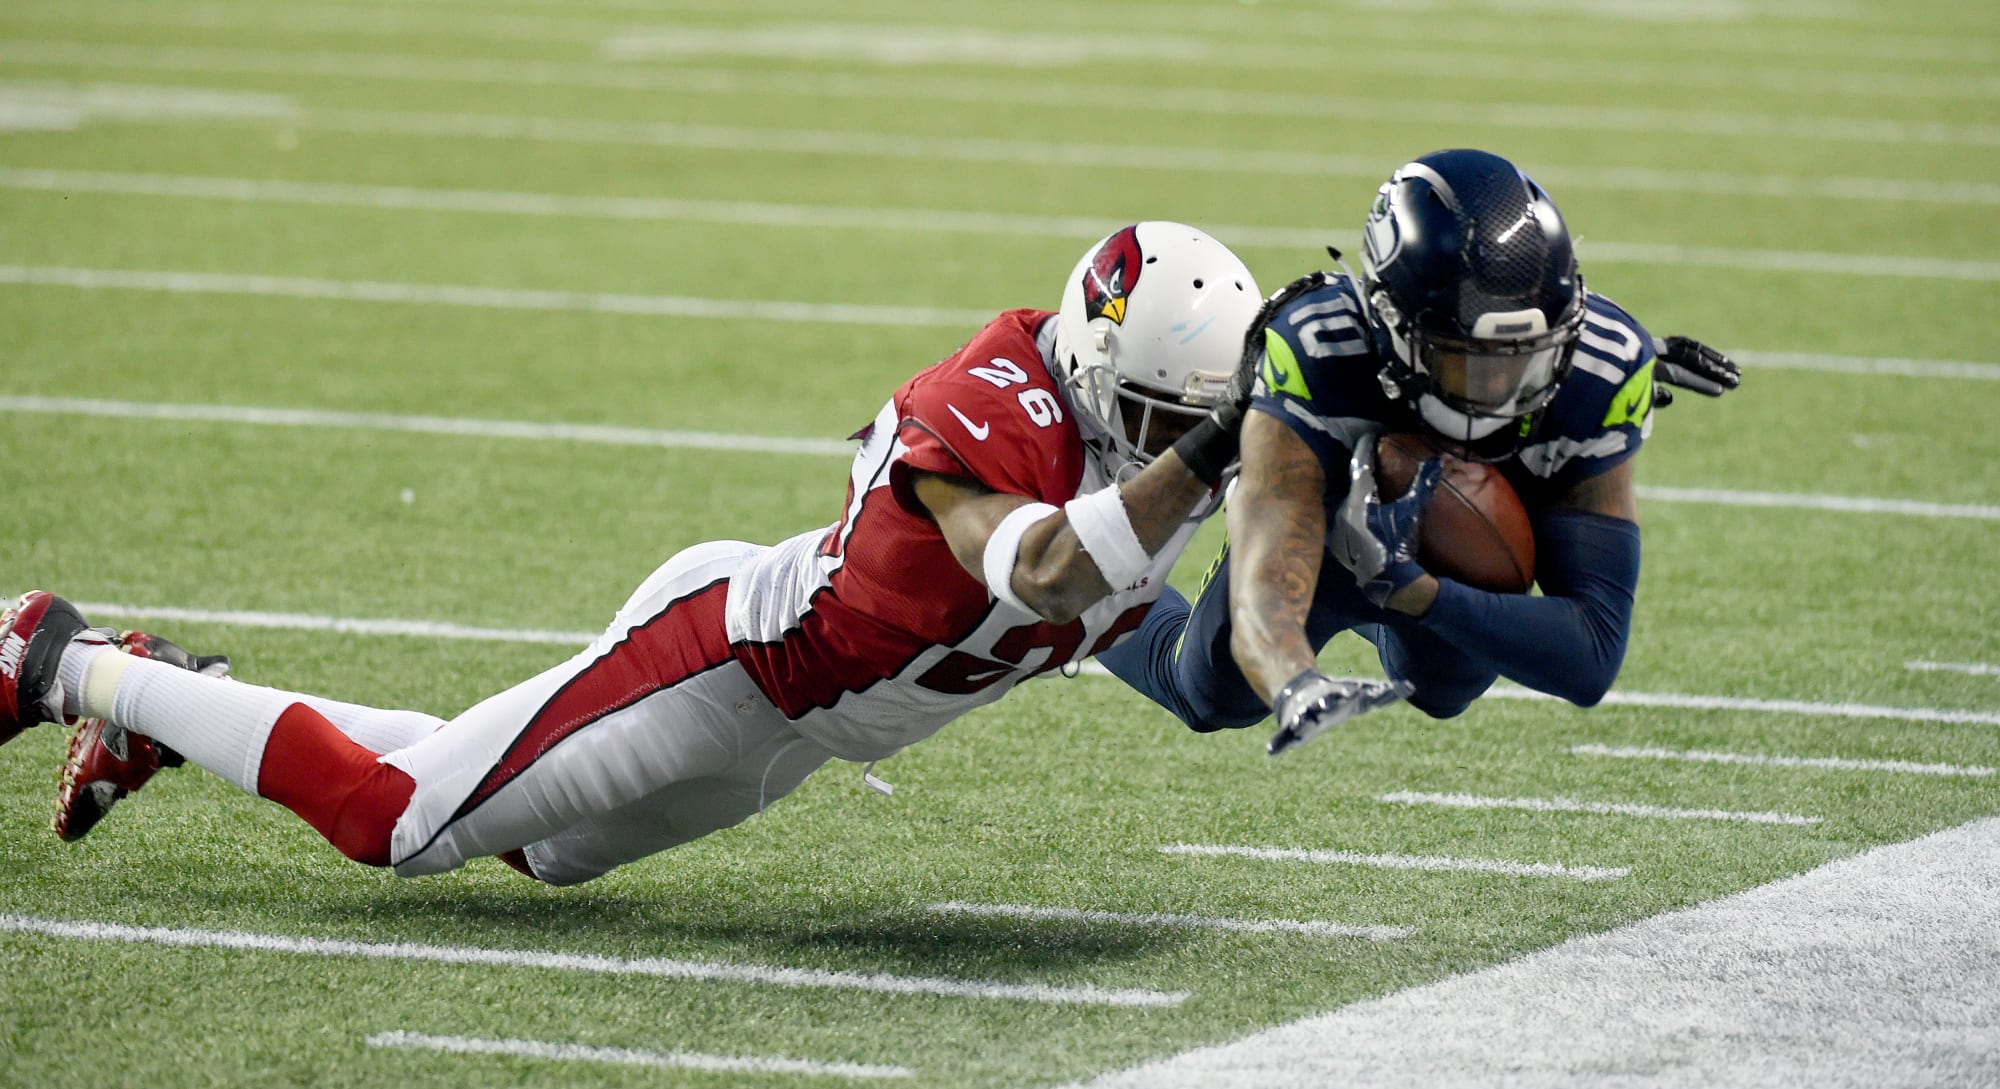 Seahawks vs. Cardinals Preview, TV coverage and live stream